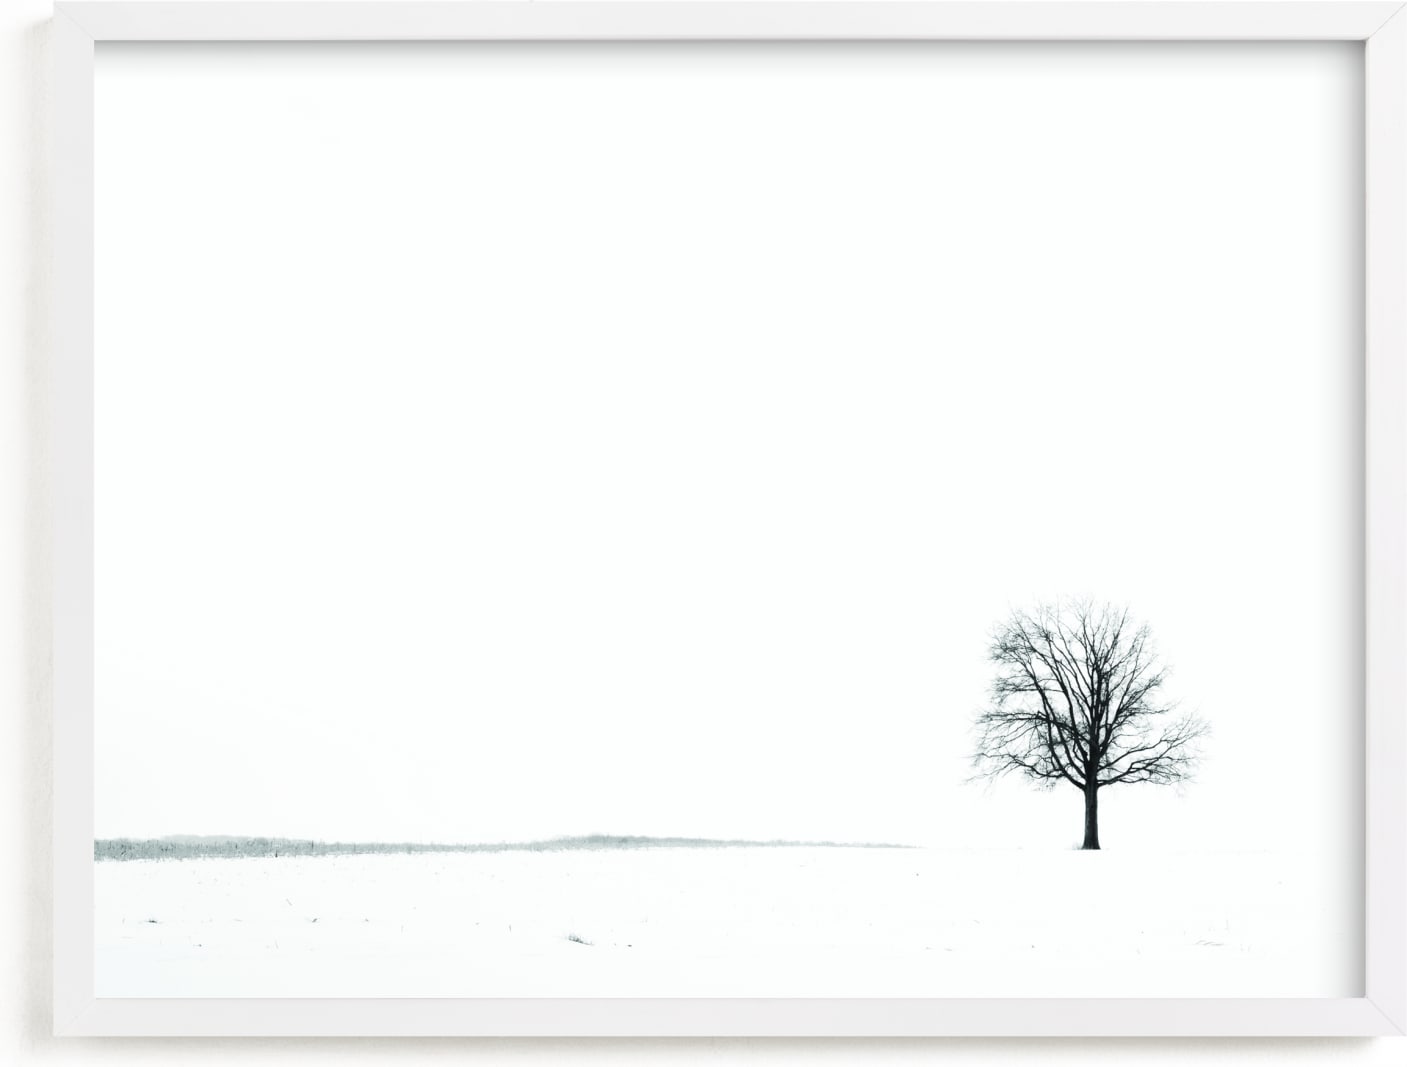 This is a black and white art by Robin Ott called Winter Tree.